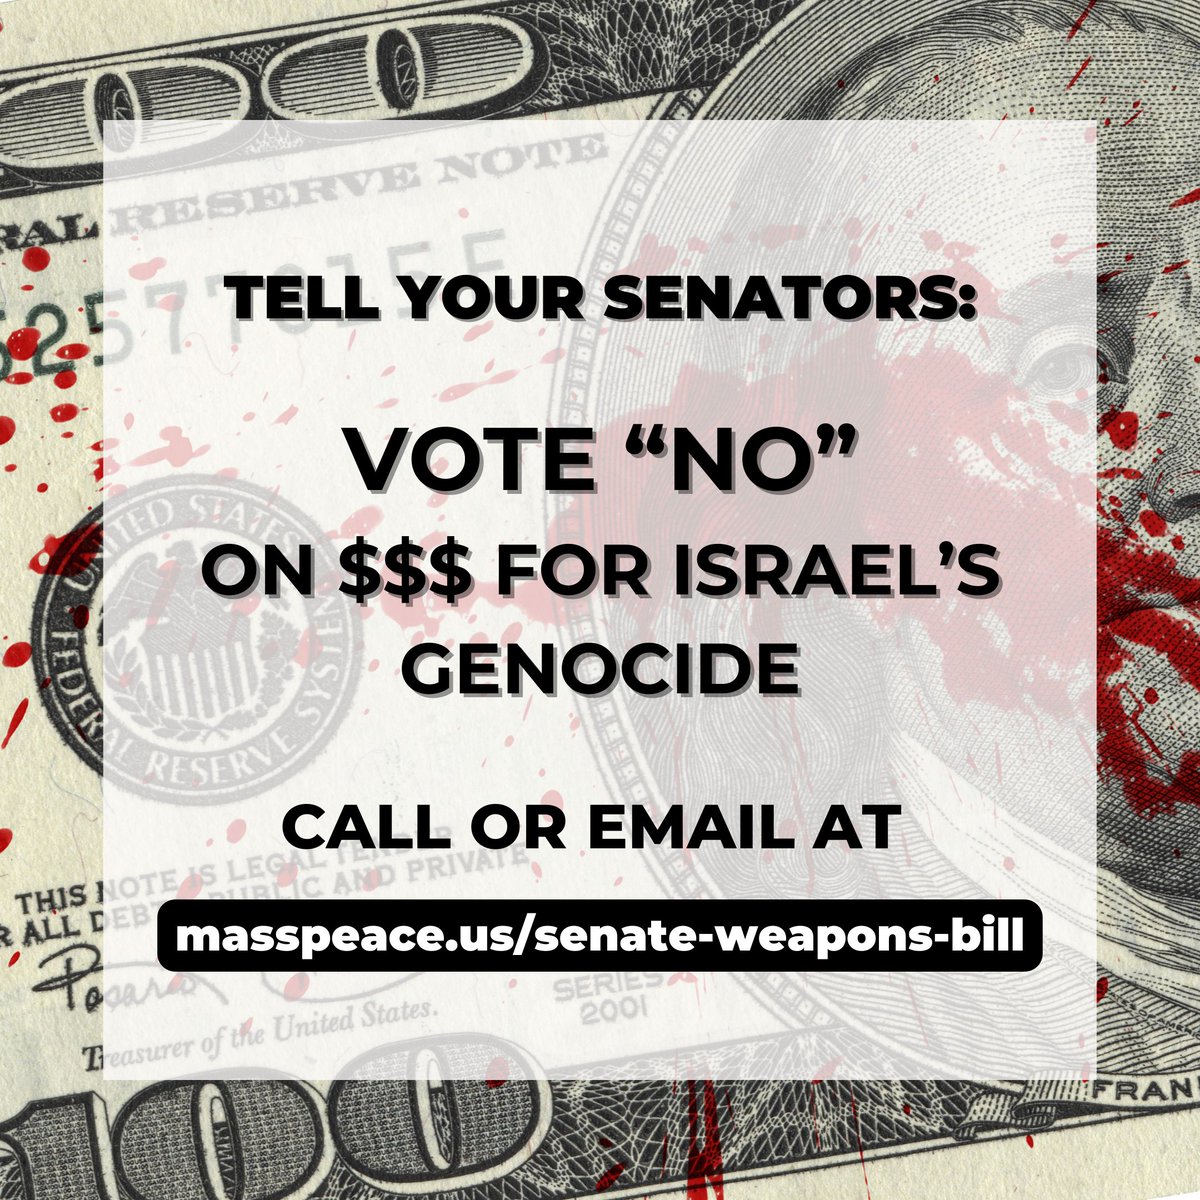 📣Attention 📣 Take Action Now! TELL YOUR SENATORS TO VOTE “NO”! At masspeace.us/senate-weapons…